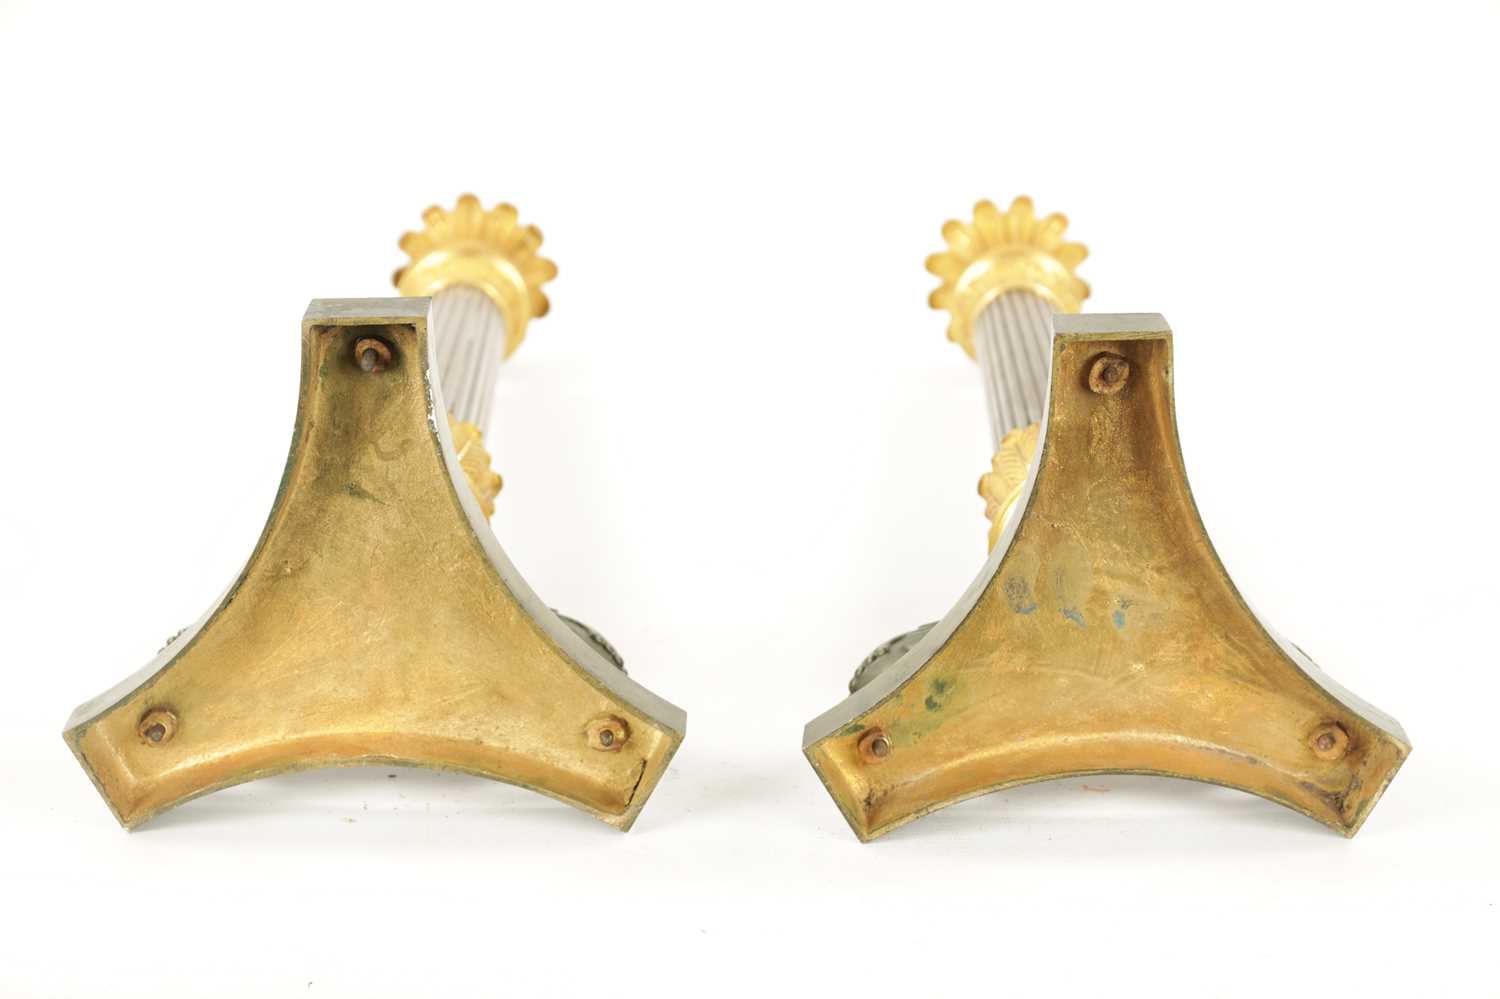 A PAIR OF REGENCY BRONZE AND ORMOLU CANDLESTICKS WITH LATER OIL LAMP FITTINGS - Image 12 of 12